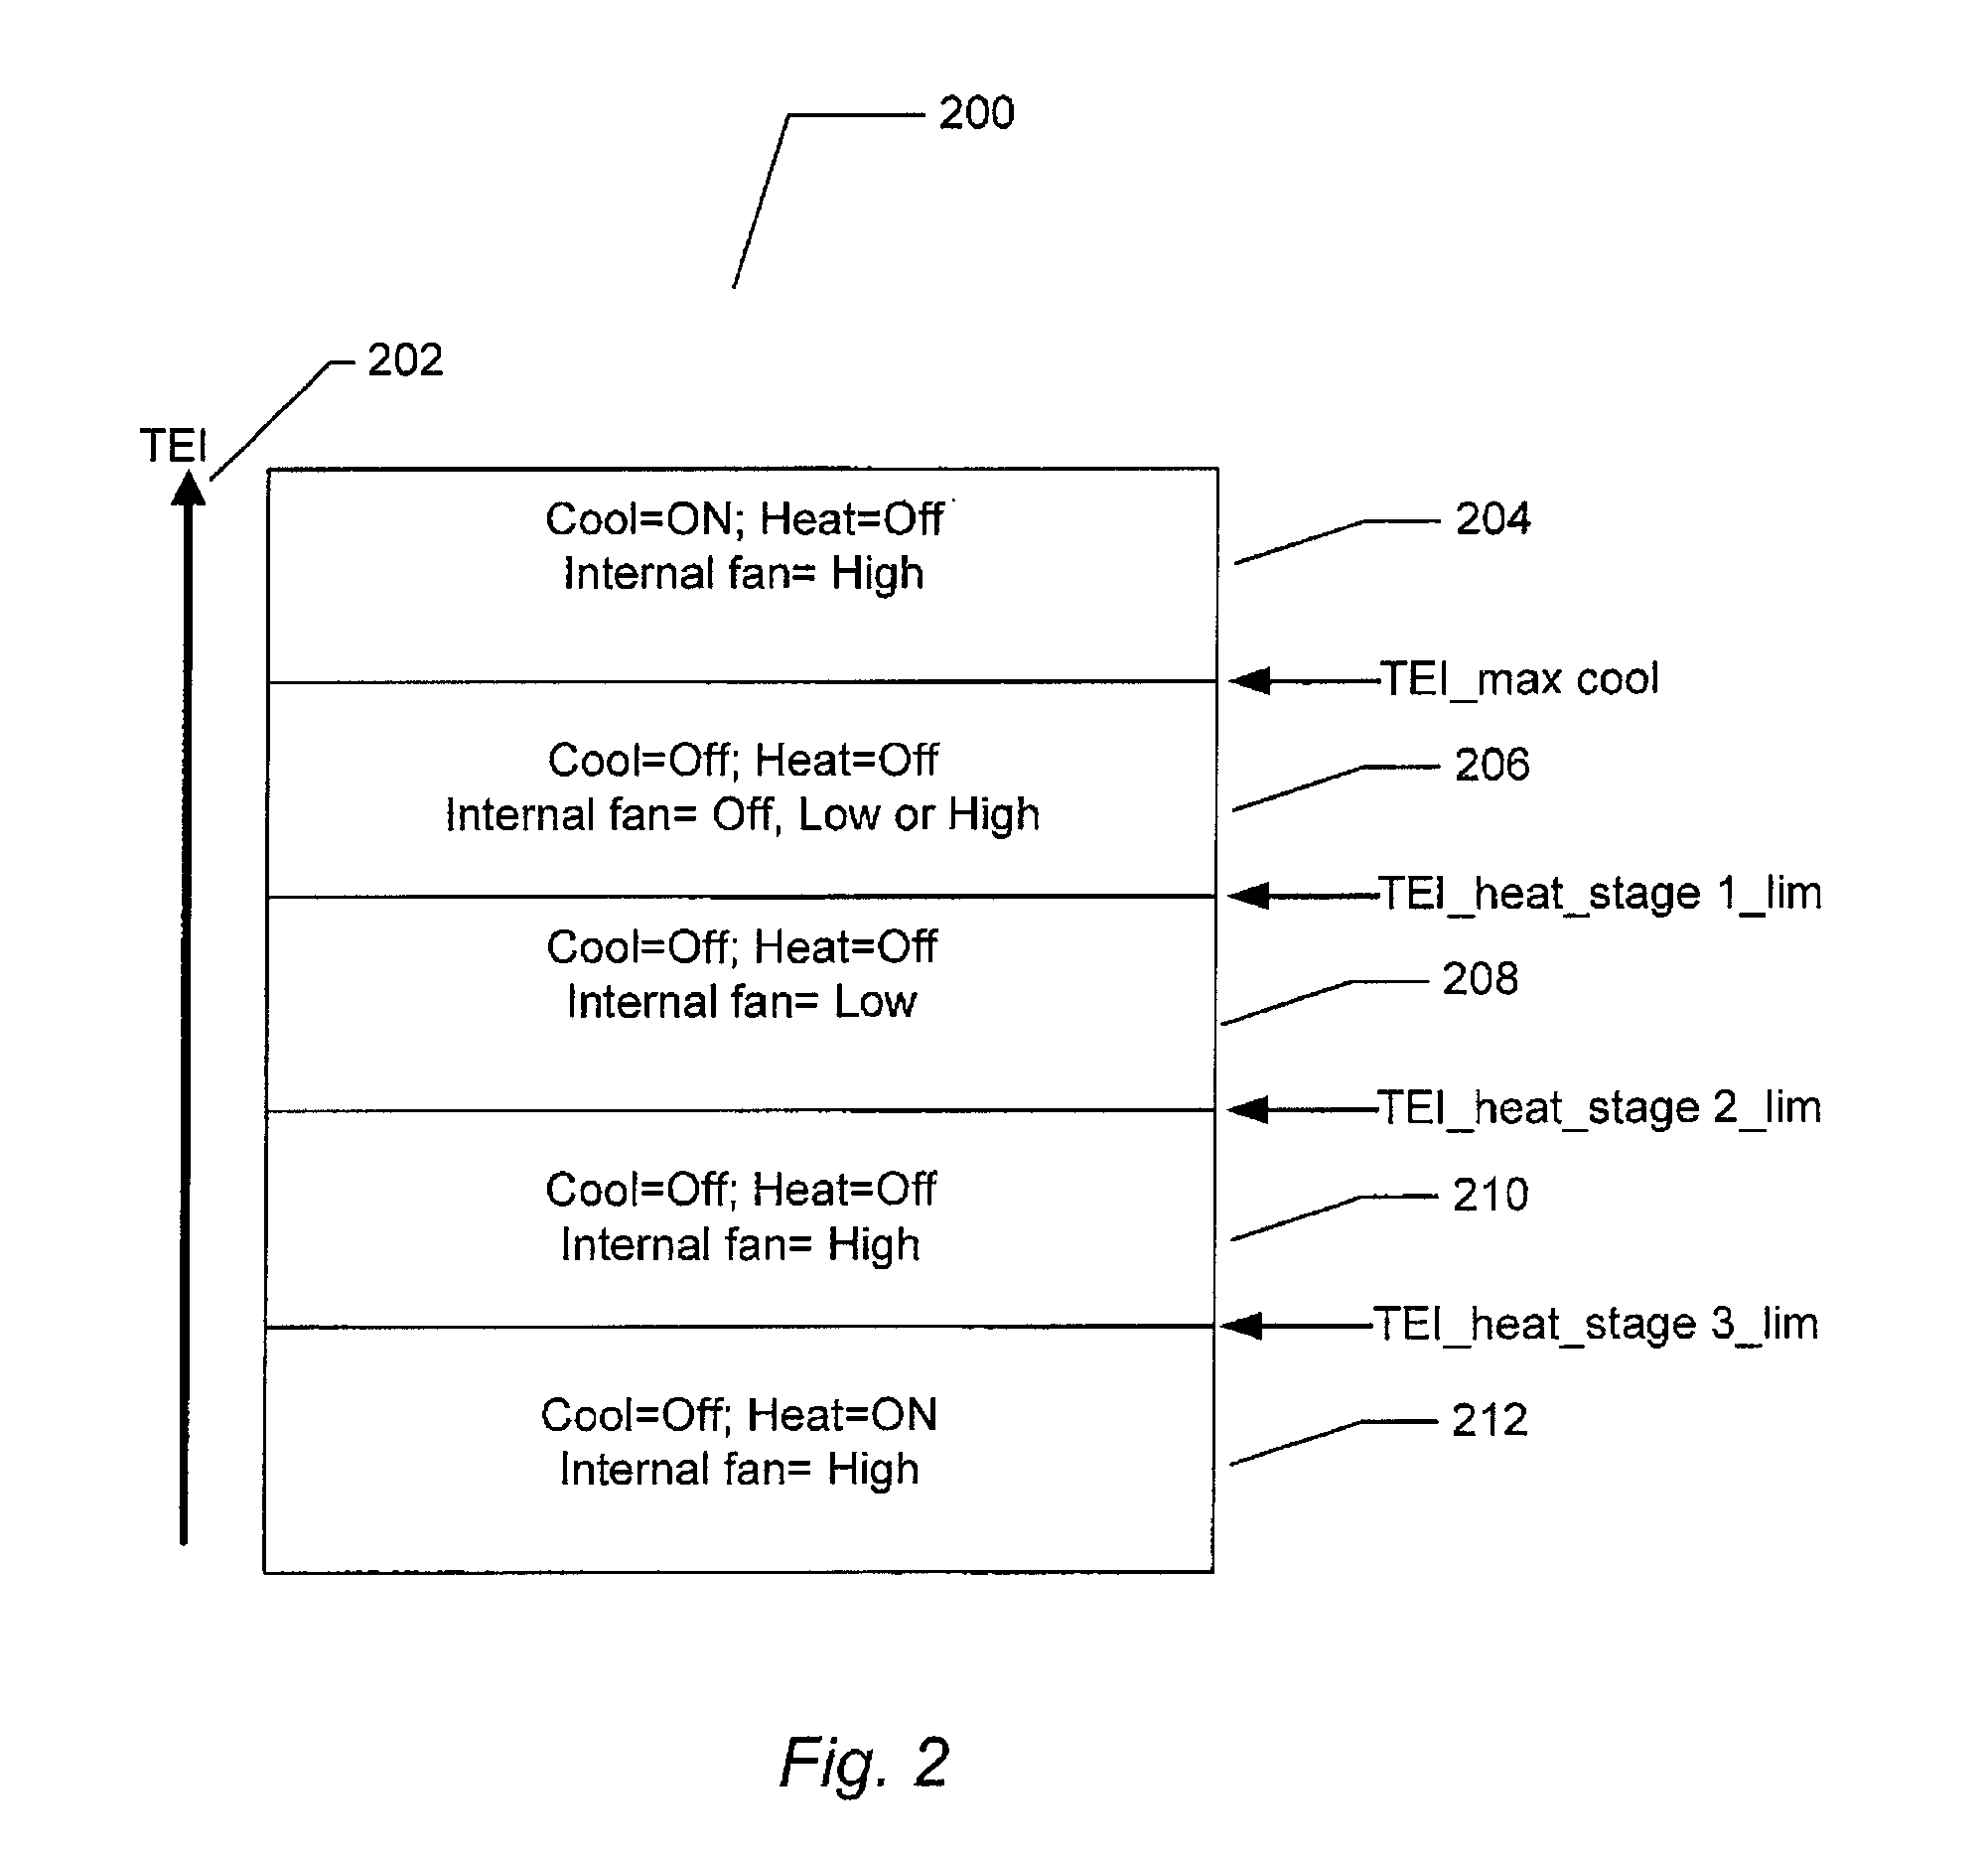 Method and system for temperature control in refrigerated storage spaces